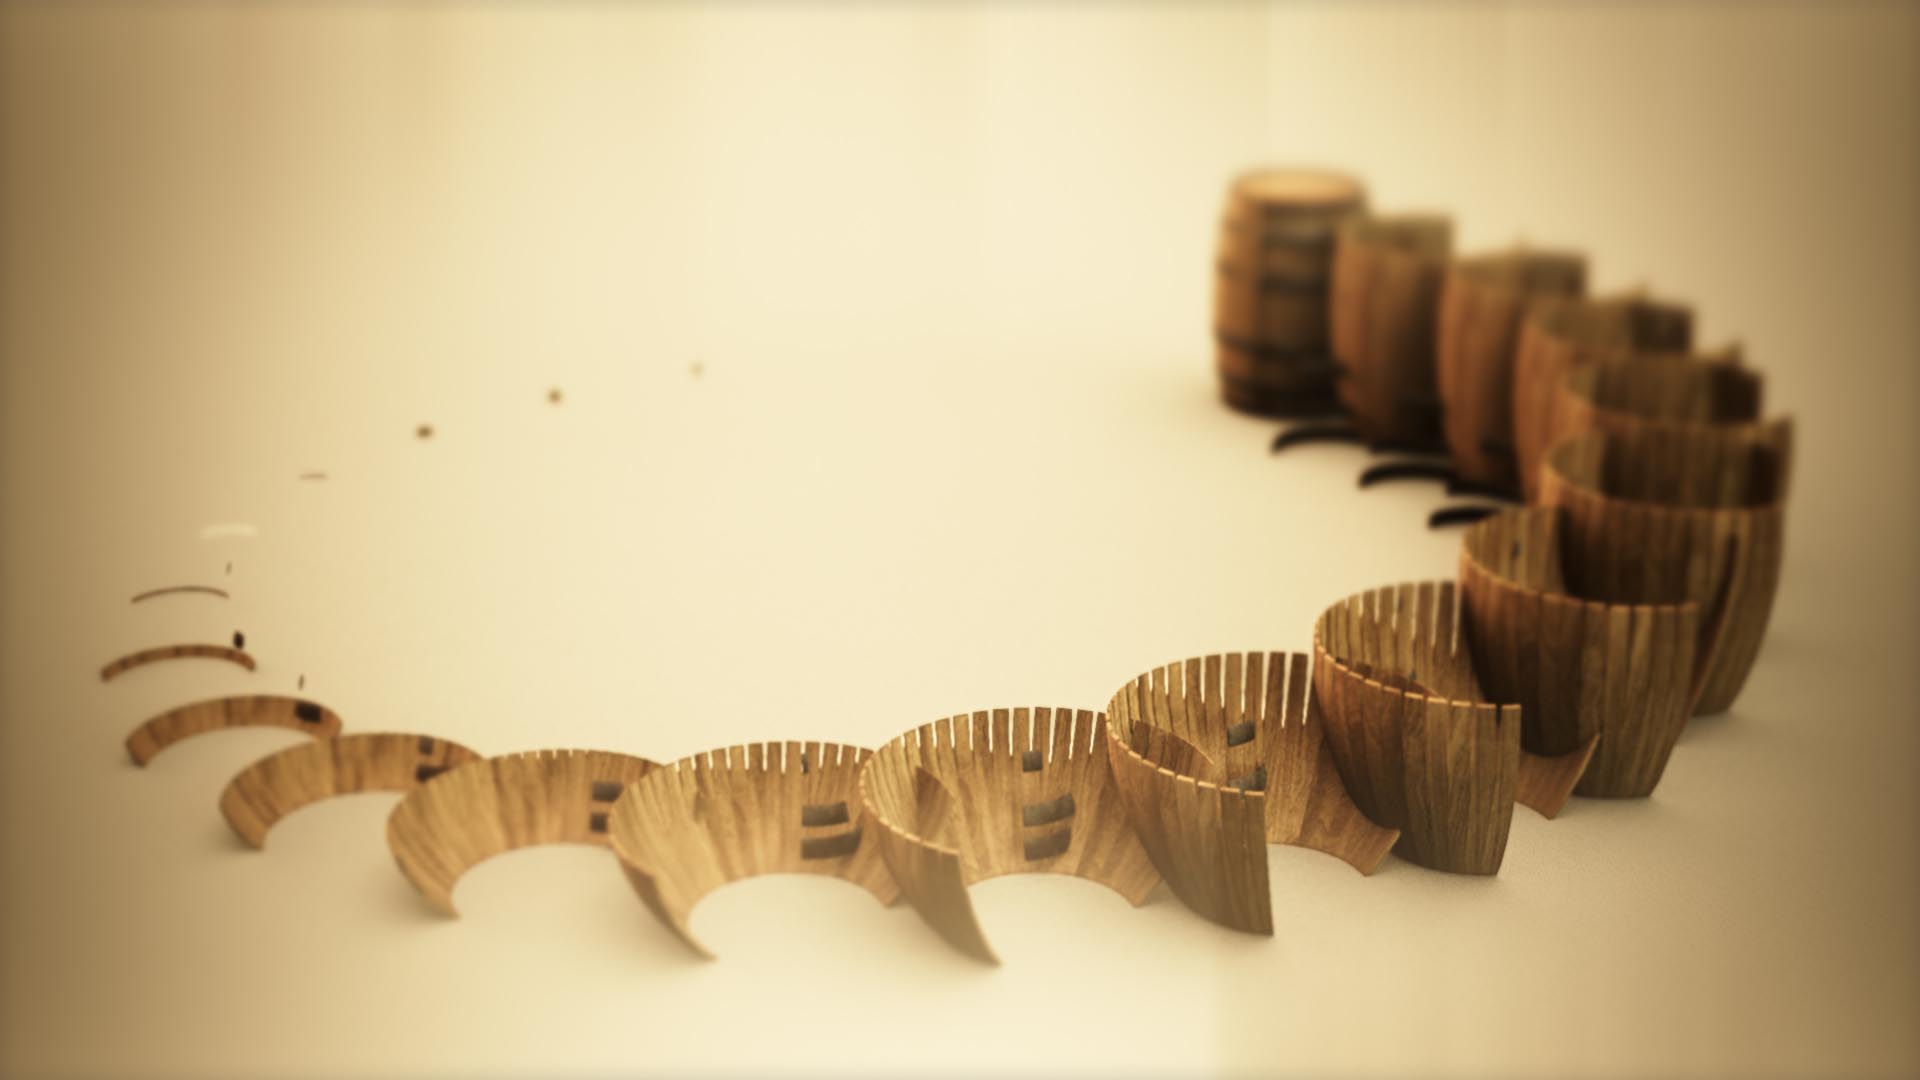 3D animation of wooden barrels forming a structure